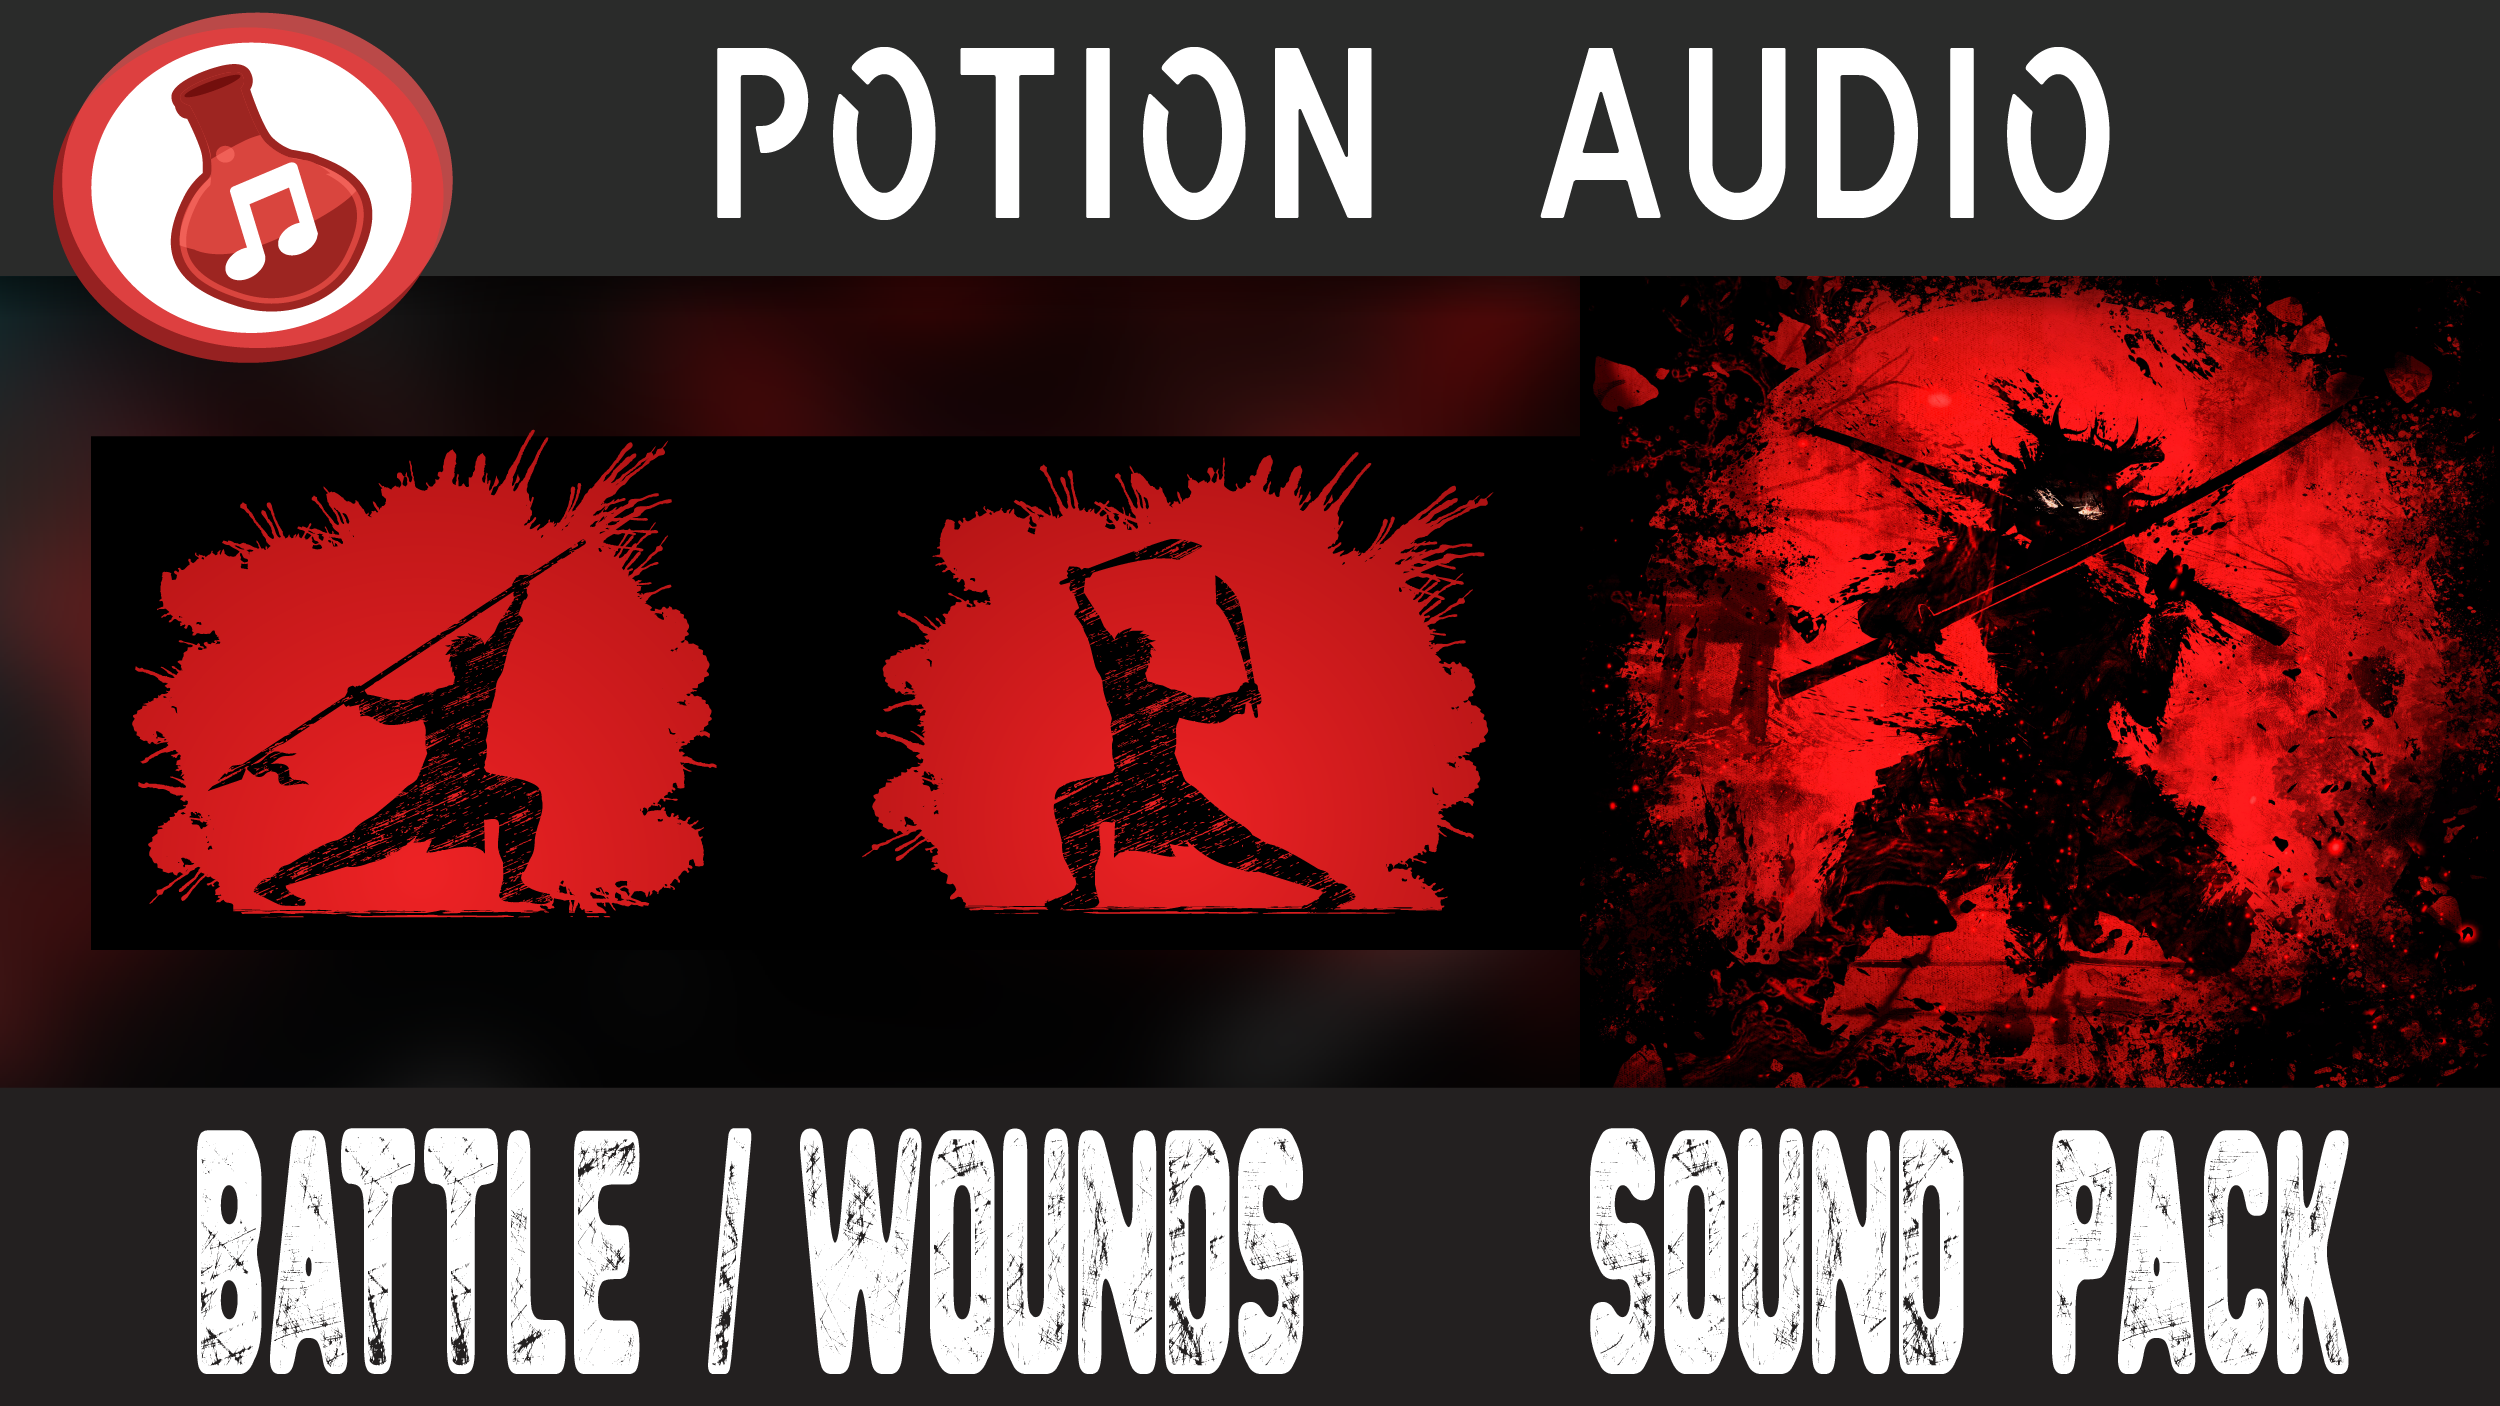 Battle & Wounds Sound Pack